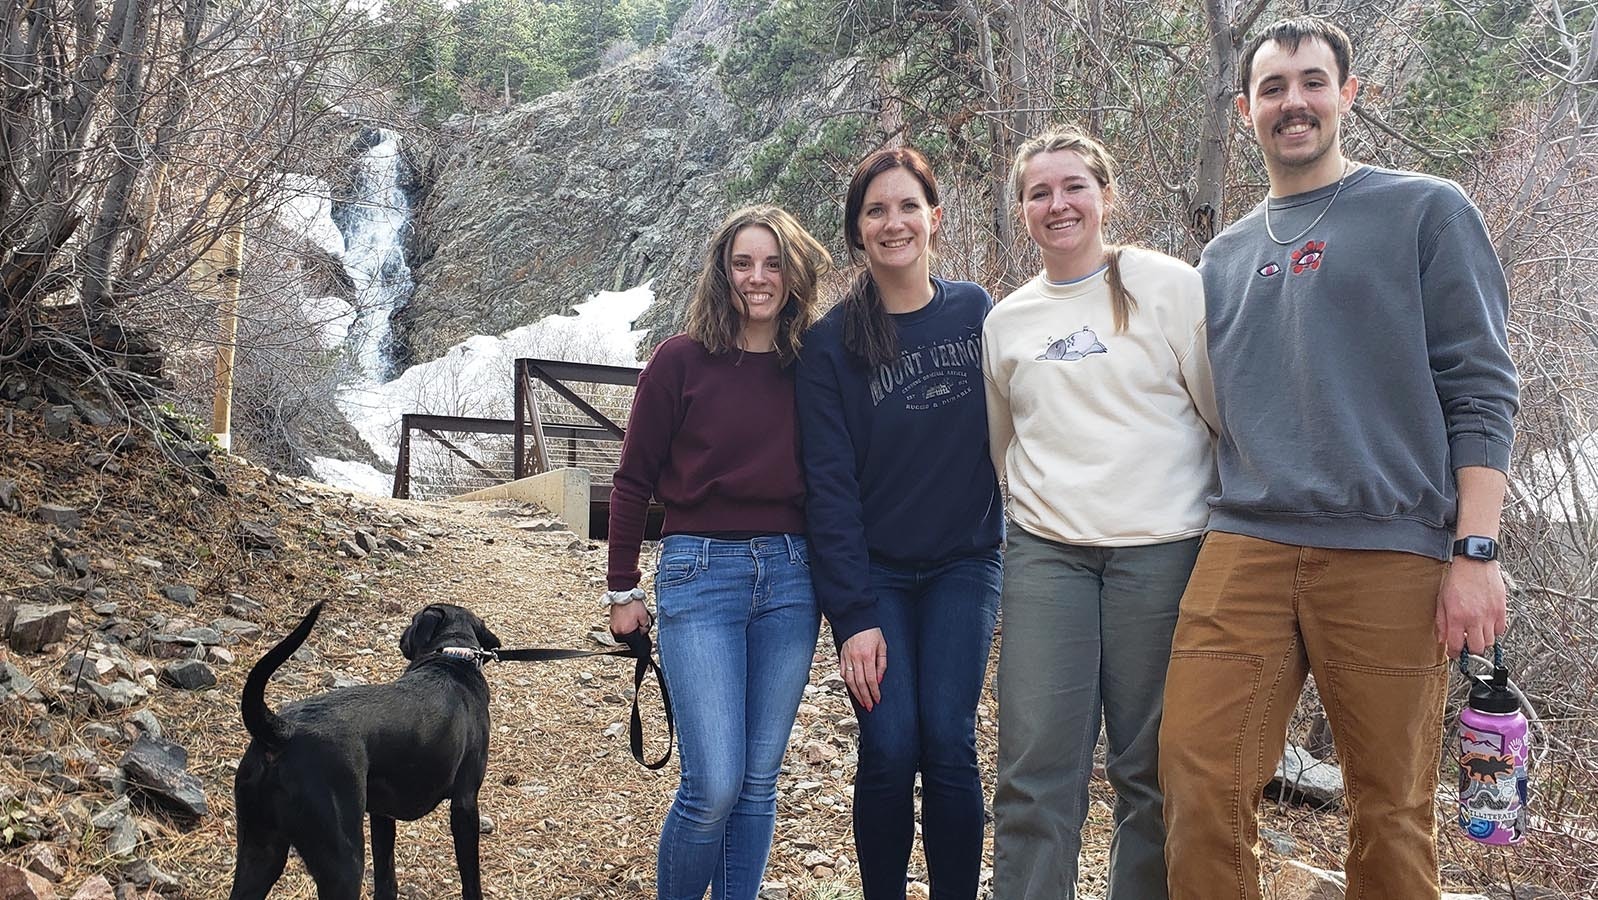 Goose the dog with owner Josie Anhom, who recently graduated from occupational therapy school, celebrates with friends Mariah Stolz of Helena, Lindsay Lee of Bozeman and brother Luke Anhom at Garden Creek Falls.